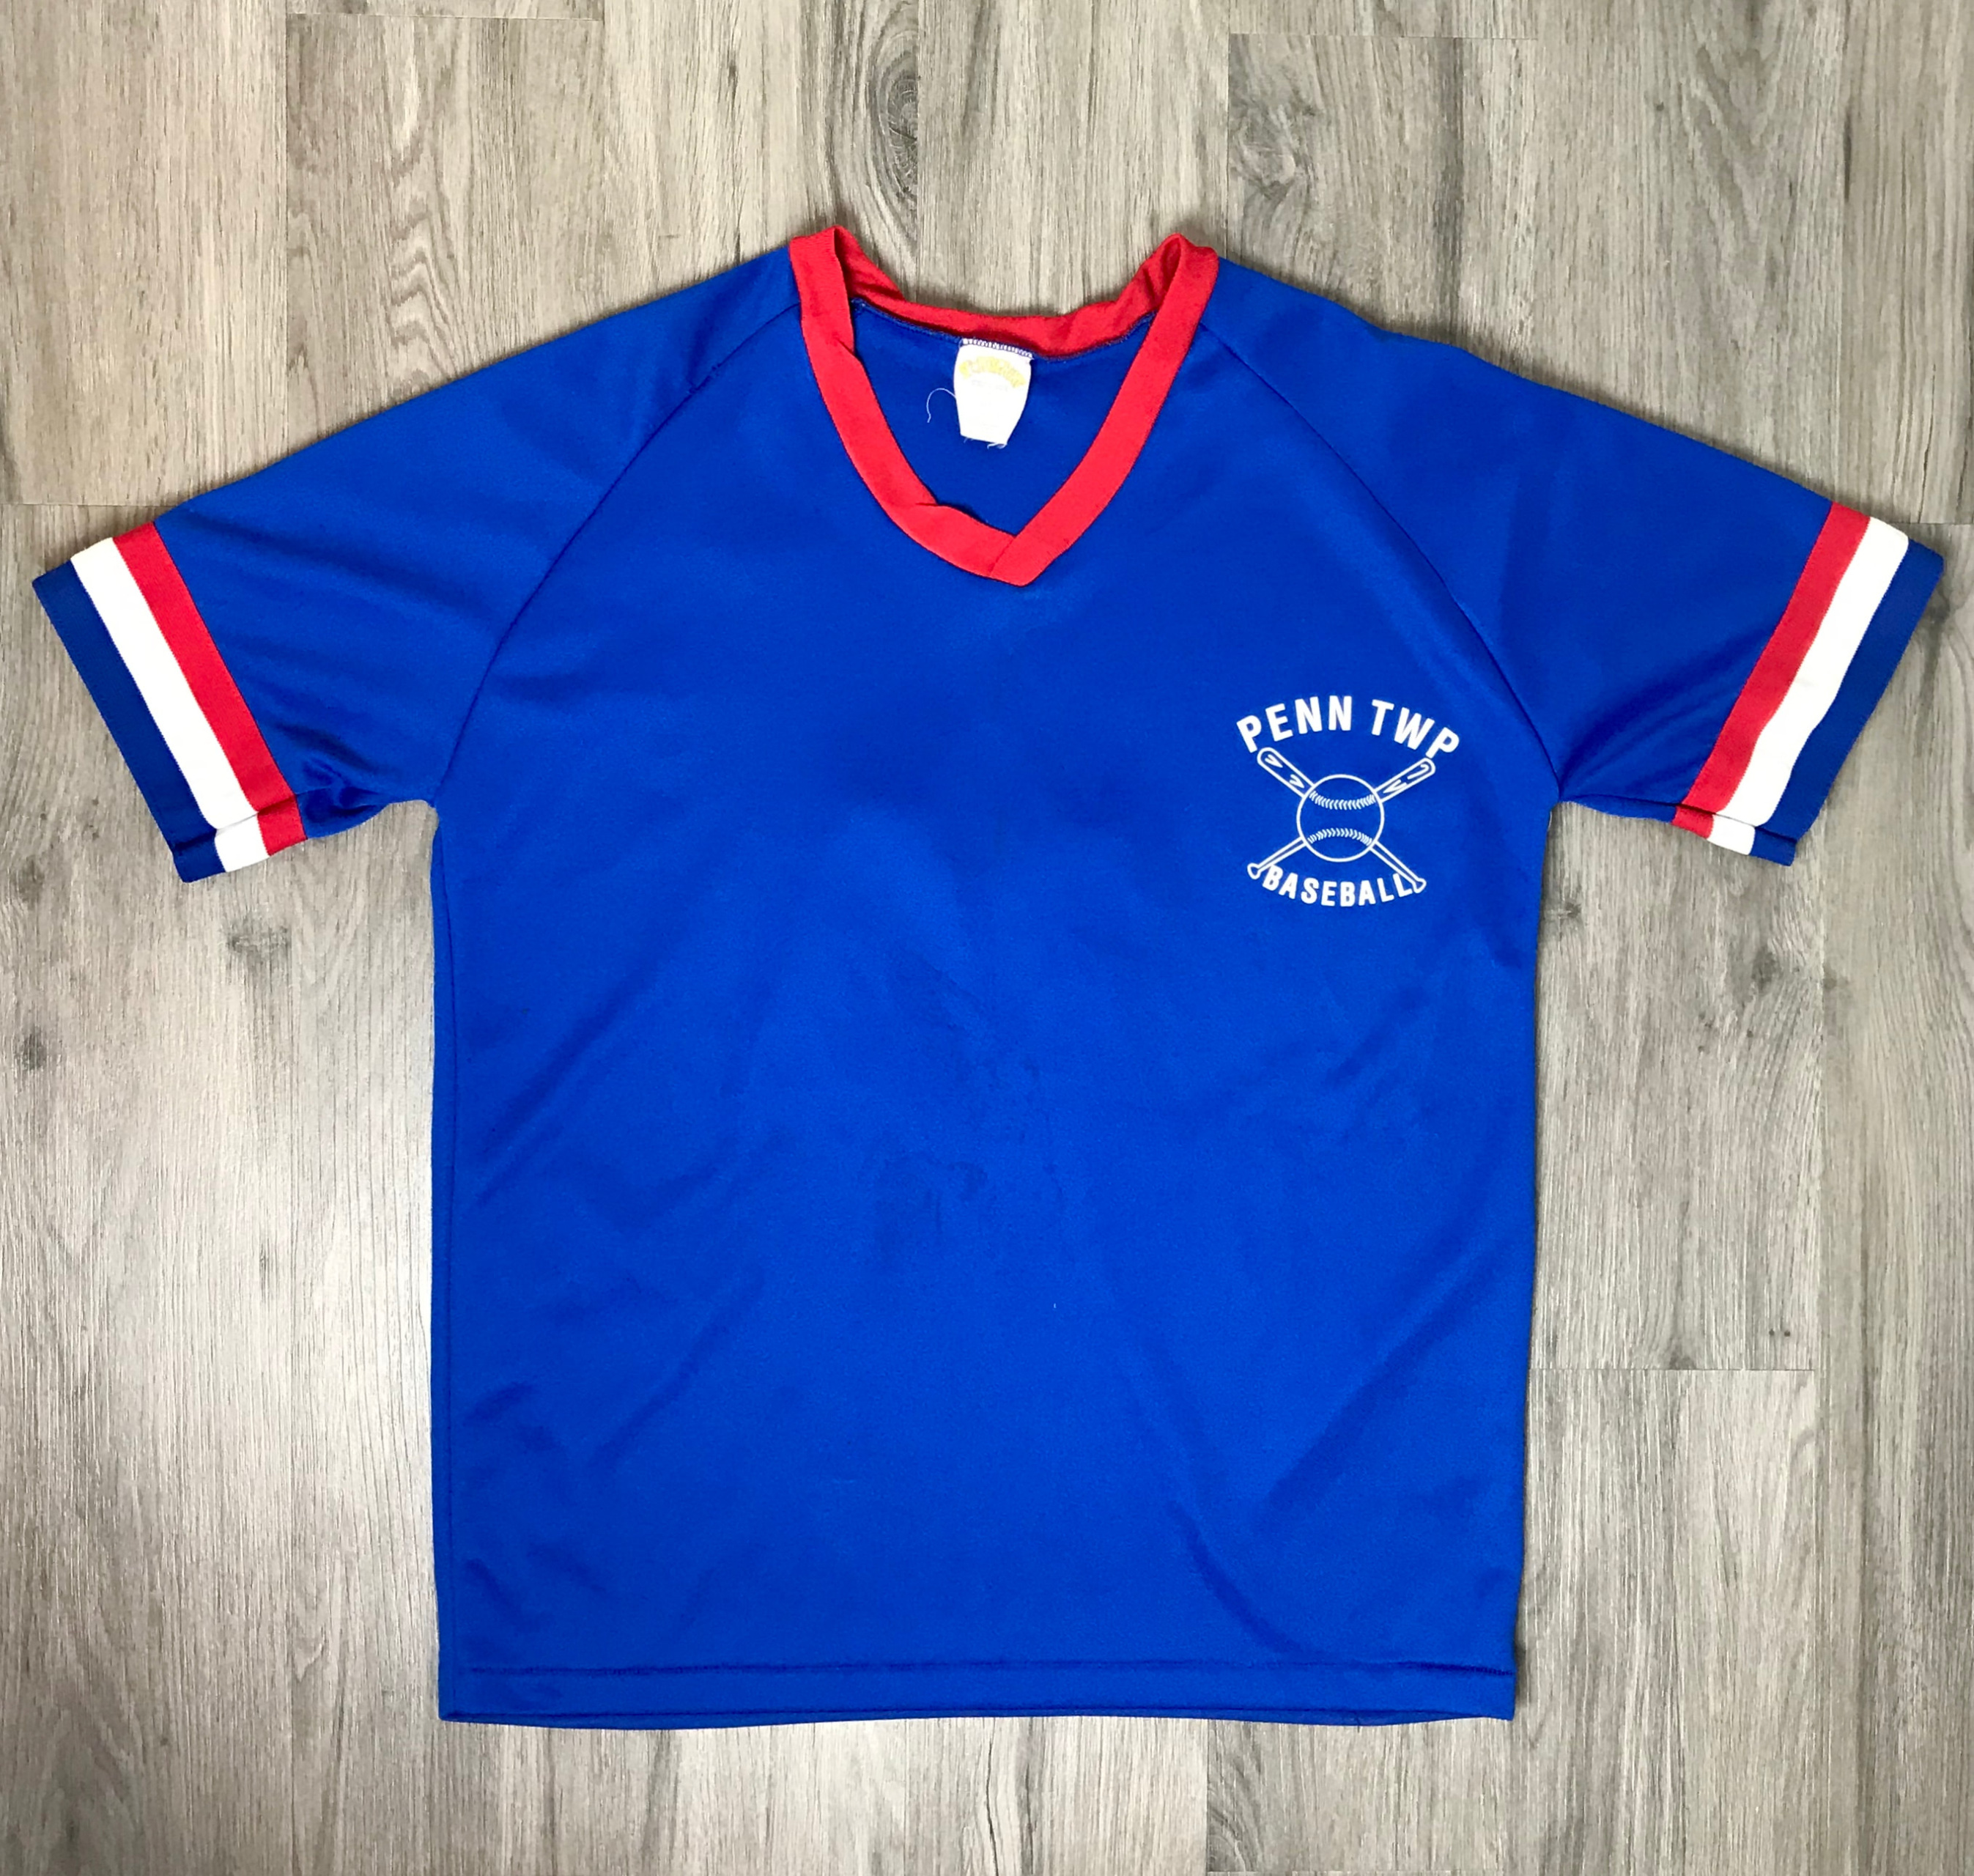 red white and blue jersey